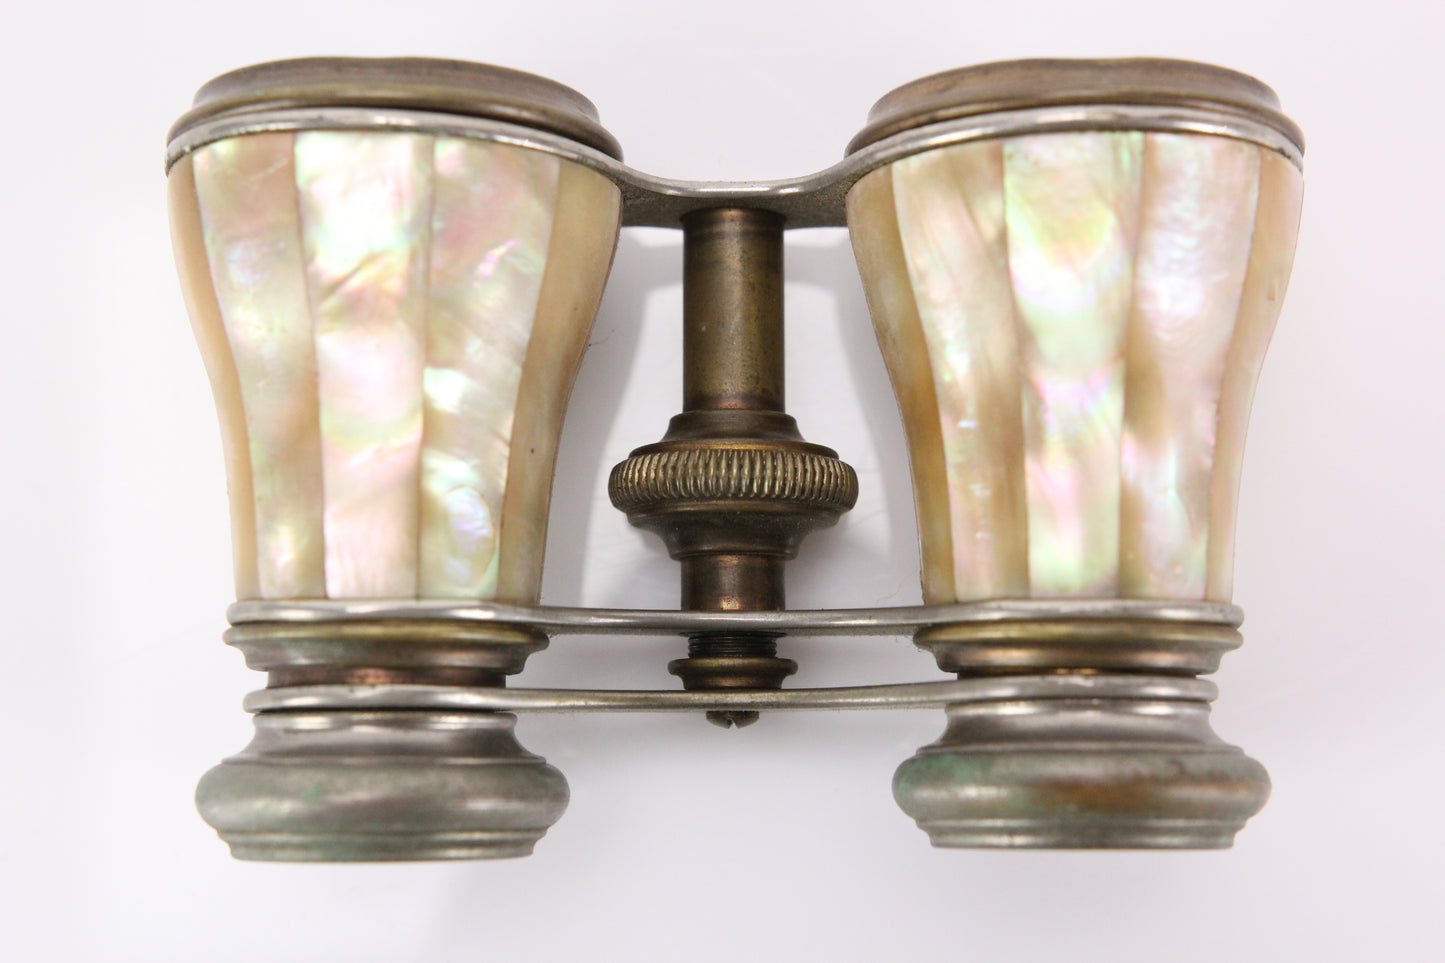 Antique La Ville Mother of Pearl and Brass Opera Glasses, Paris, France